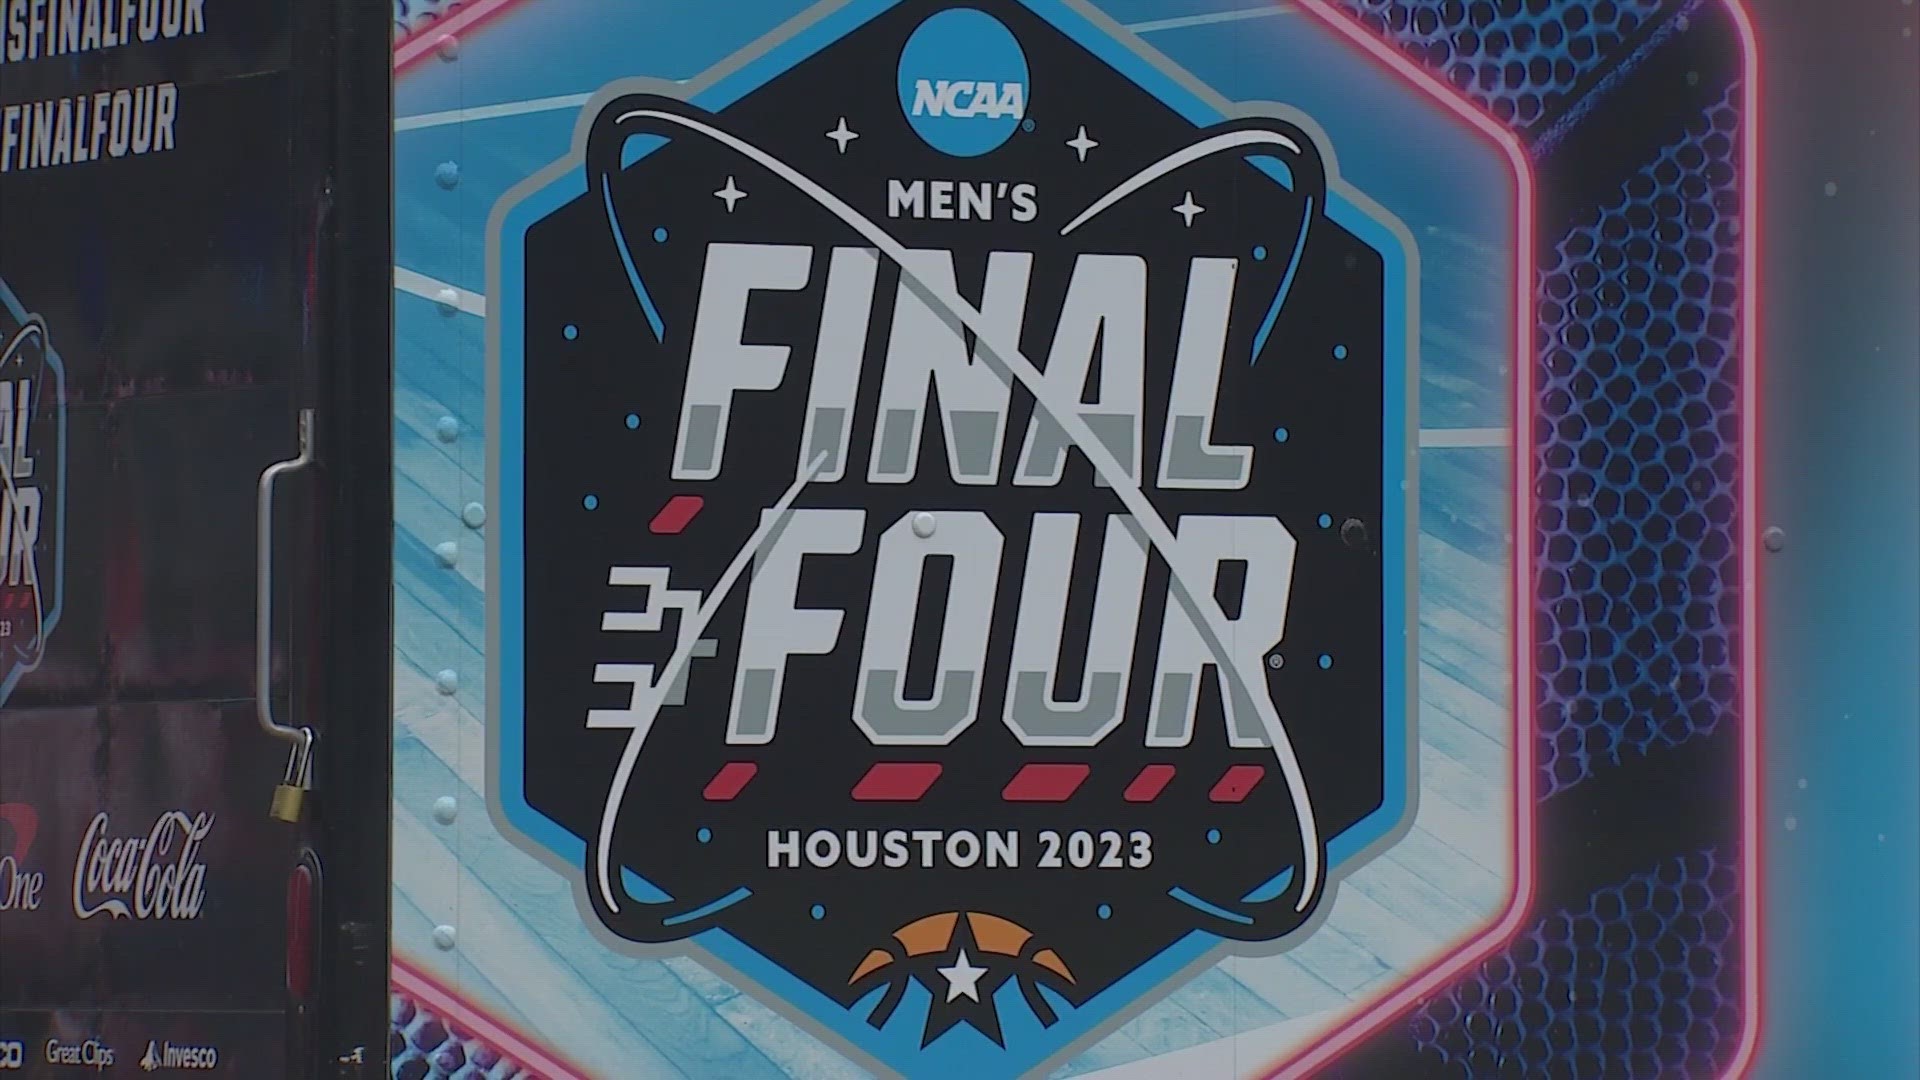 Being the host city puts Houston in the national spotlight. Final Four weekend also comes with a major economic impact.